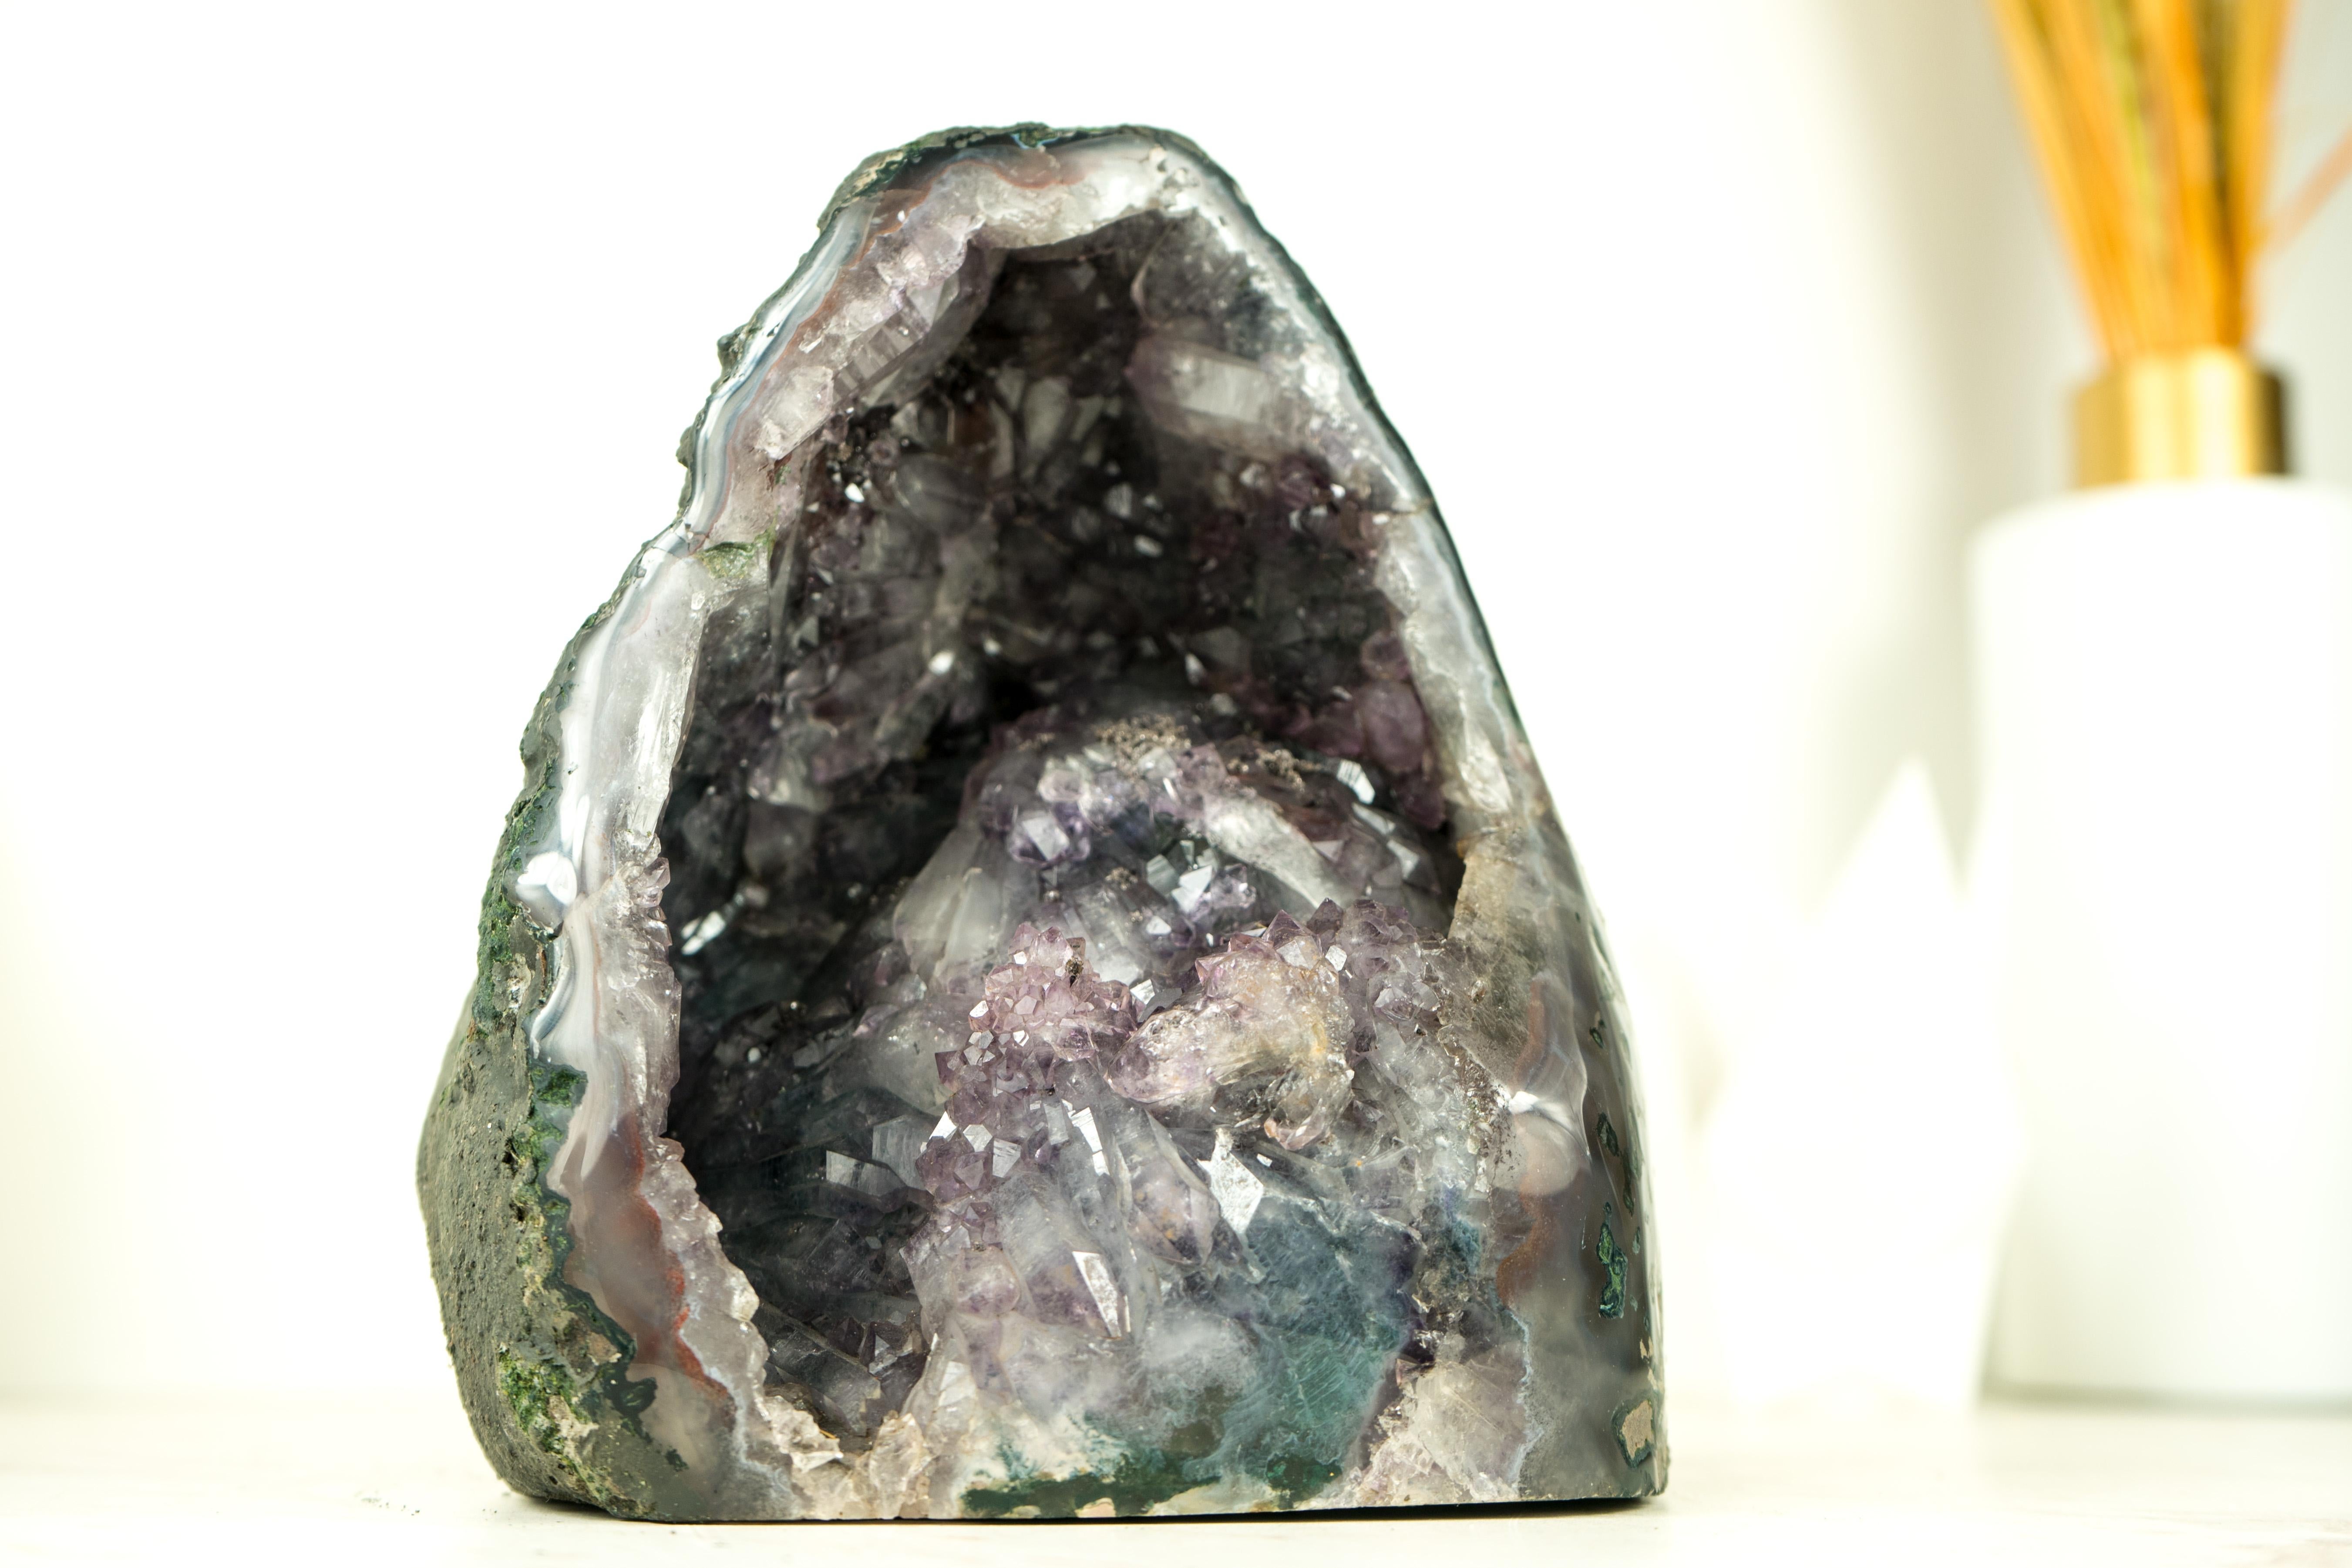 All Natural, Small Amethyst Geode with Rare Amethyst Druzy and Flower

▫️ Description

This small Amethyst Geode is a natural masterpiece, showcasing a stunning formation, rarely seen druzy, and an Amethyst flower forming. Its unique composition